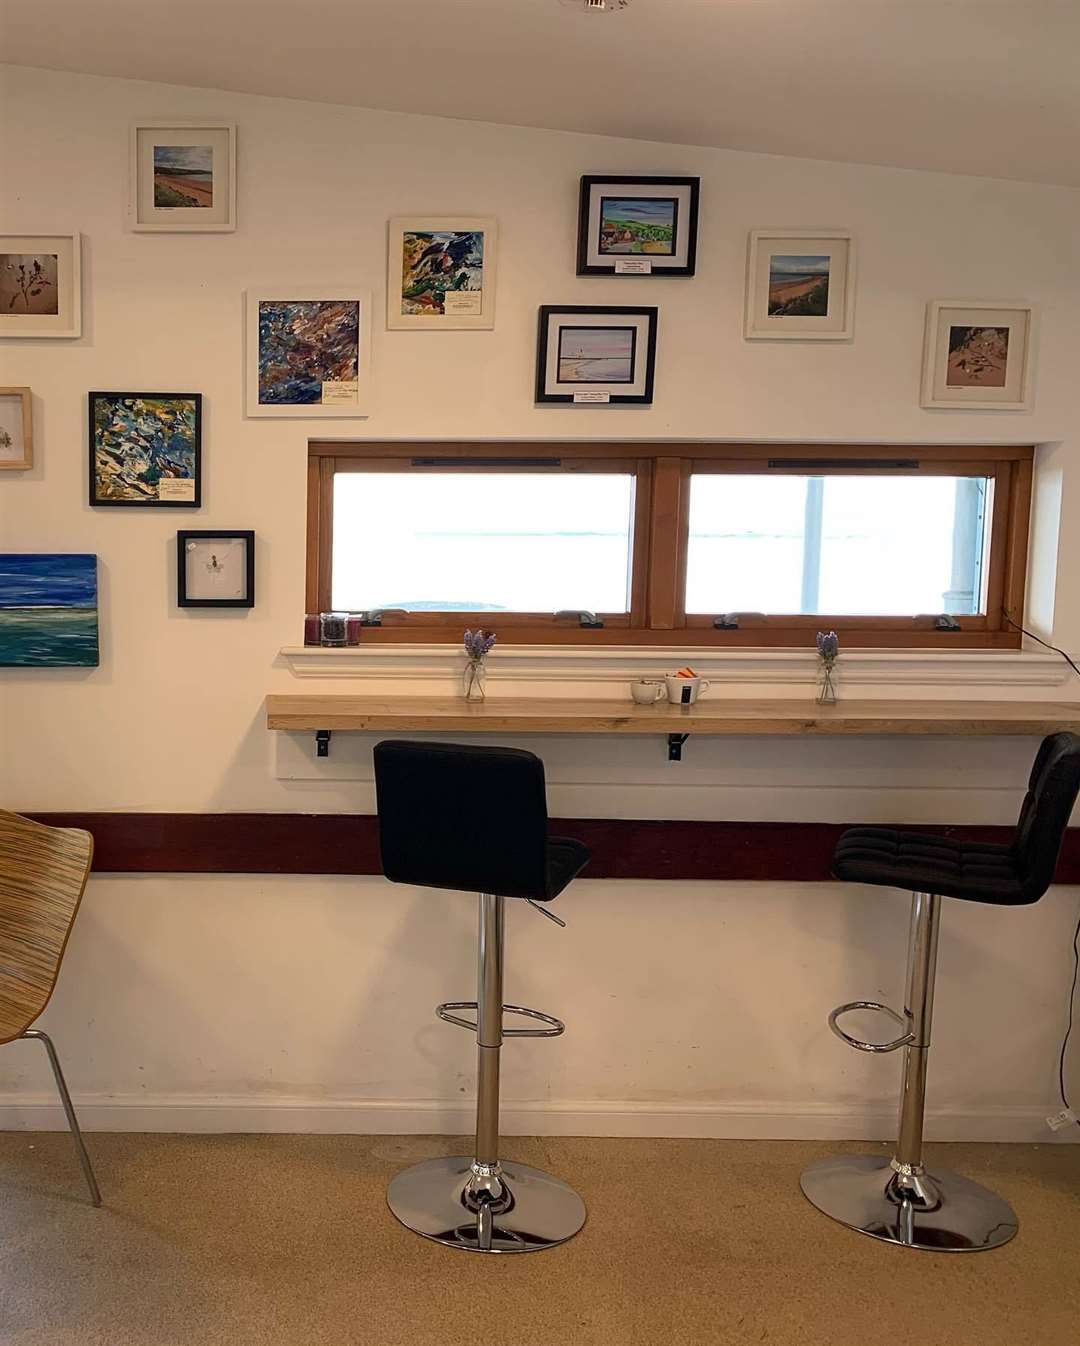 The beach cafe boasts a slick new look inside. Picture: Rosemarkie Amenities Association and Beach Cafe